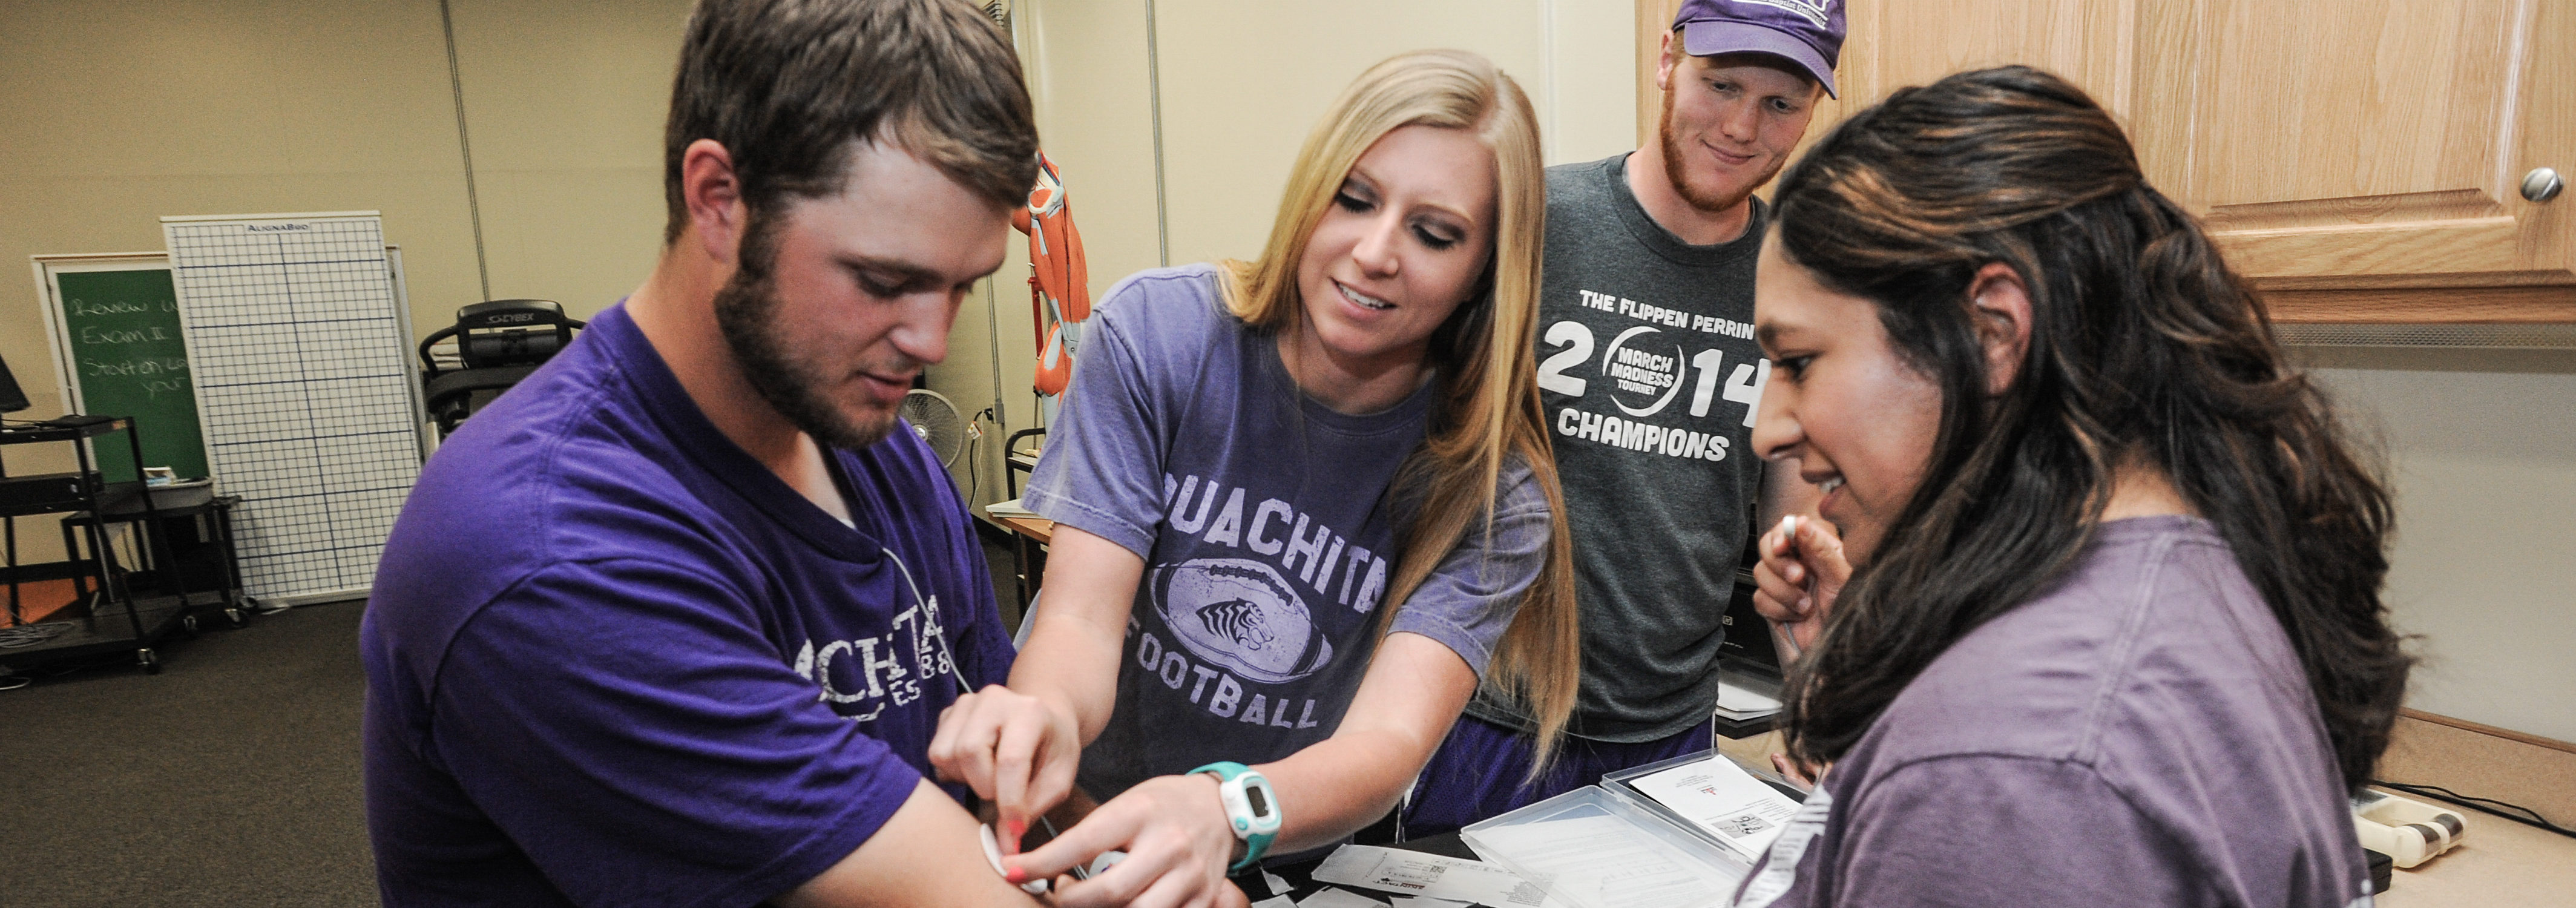 Ouachita received Gold Status credential, national recognition from the American College of Sports Medicine.